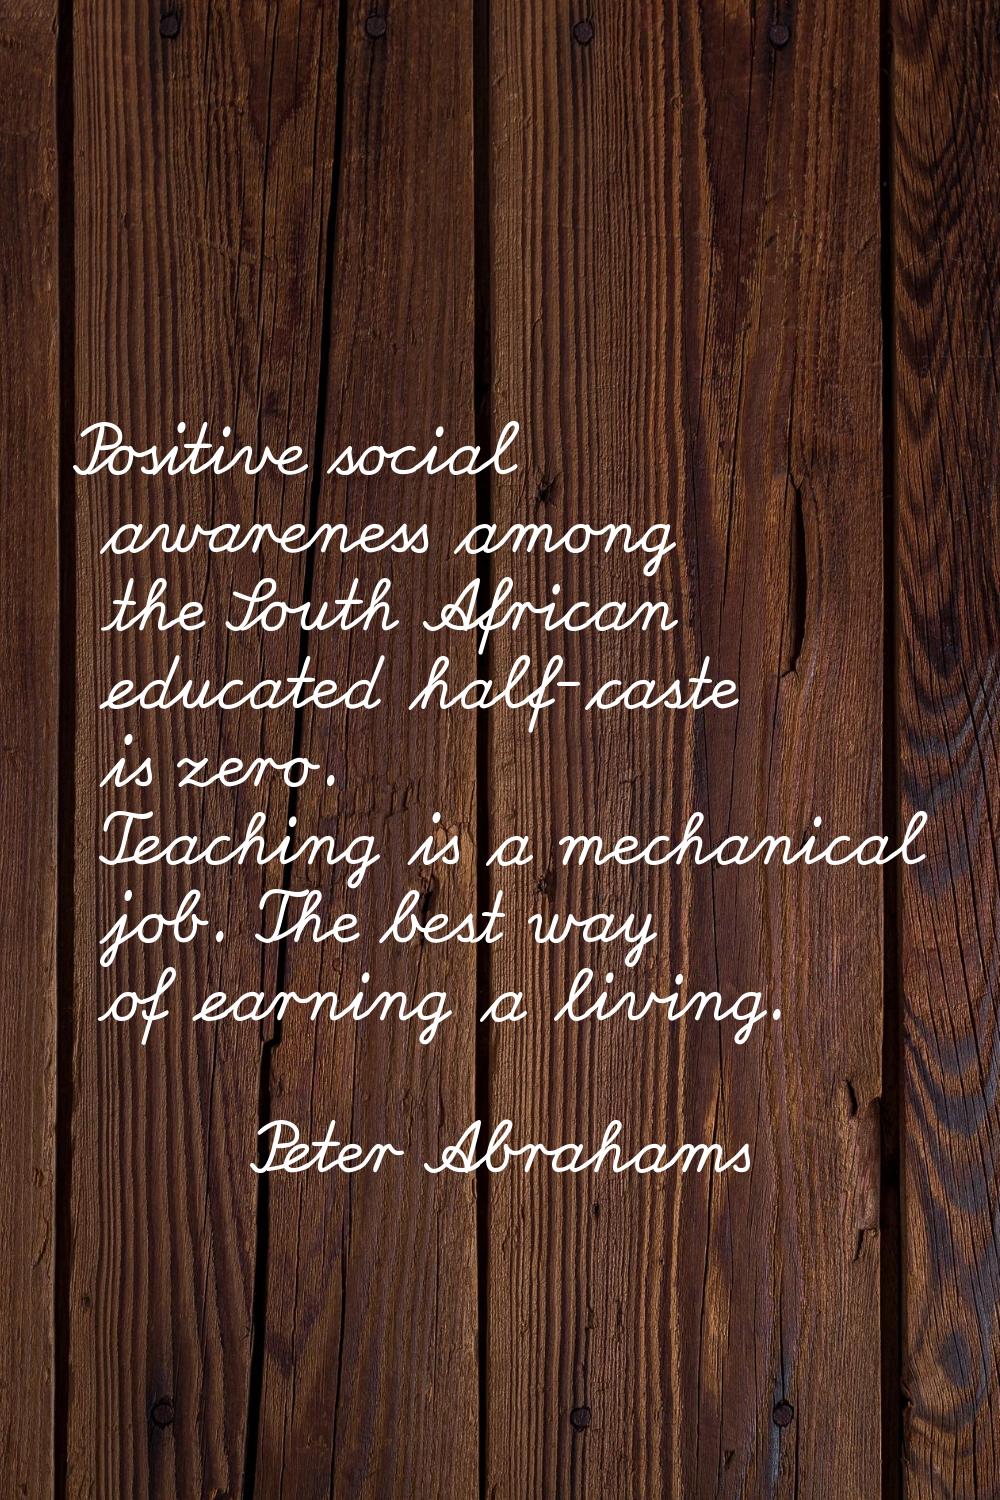 Positive social awareness among the South African educated half-caste is zero. Teaching is a mechan